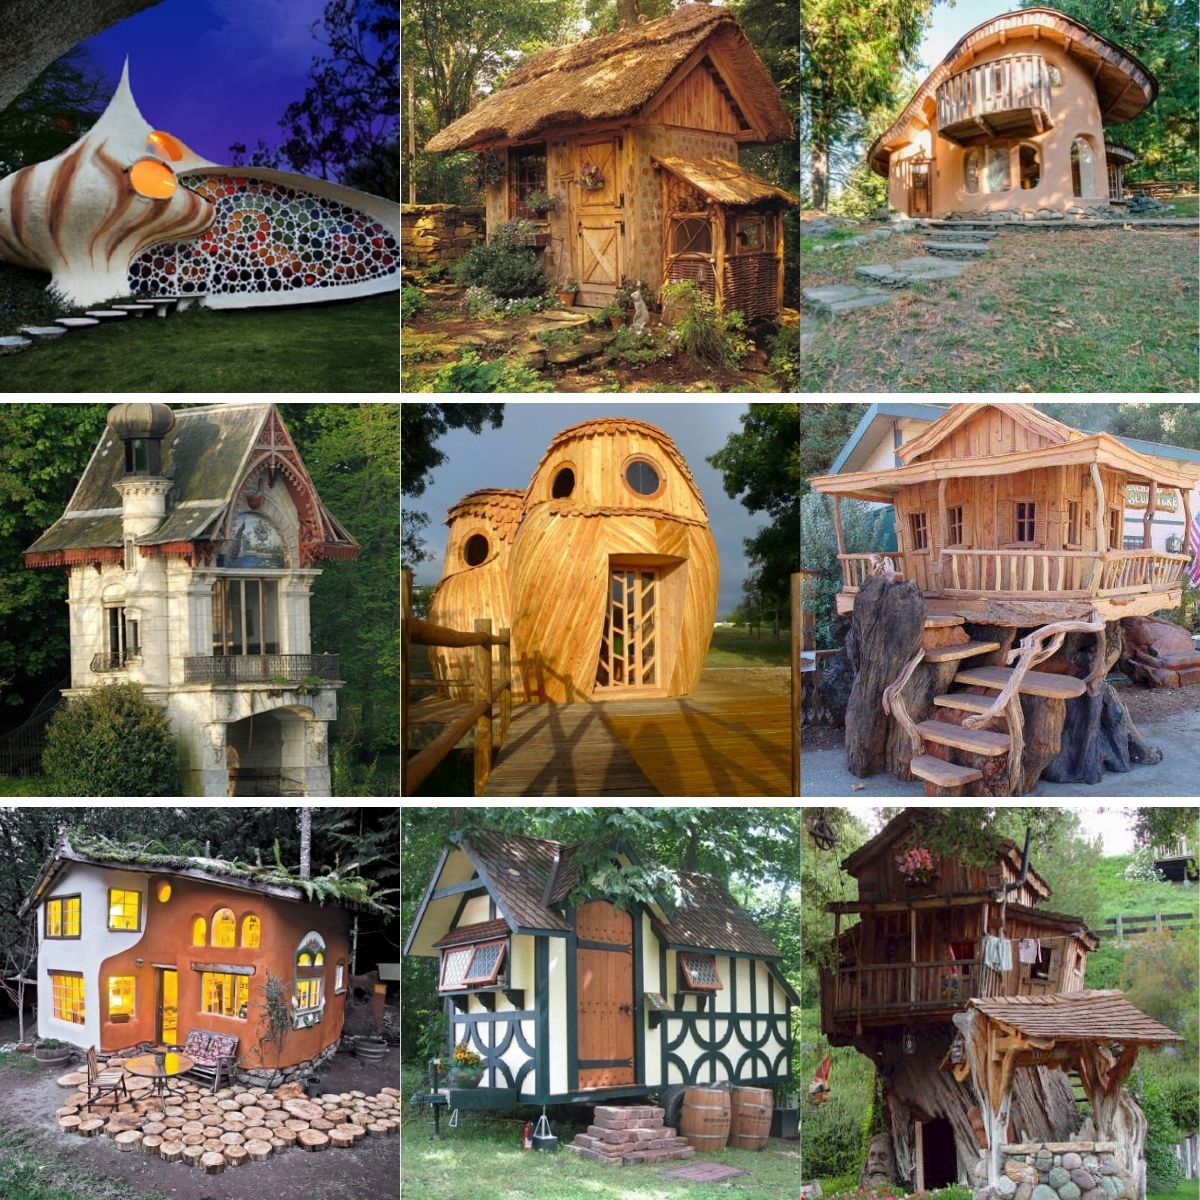 These 35 Enchanting Tiny Houses Look Just Like Real Life Fairy